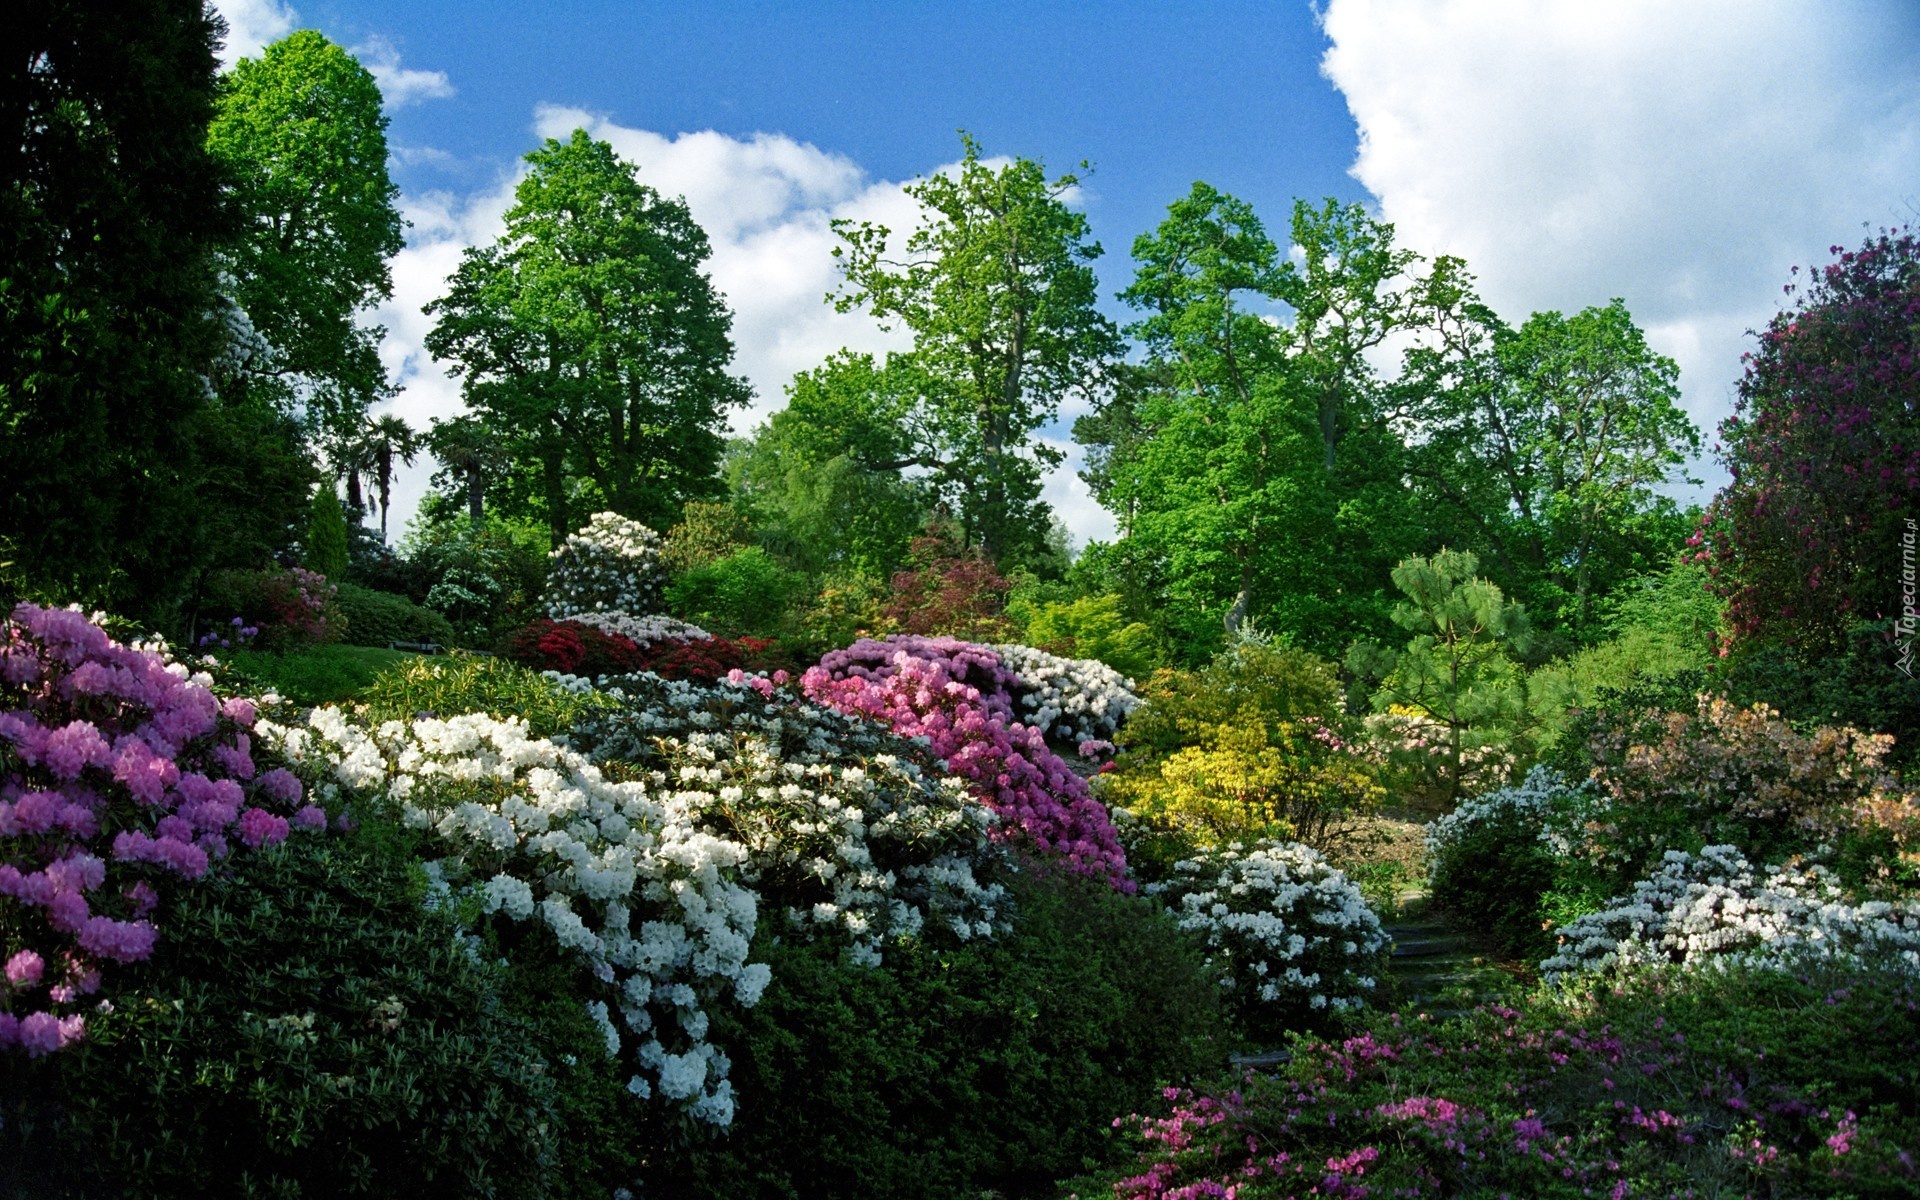 Park, Kwiaty, Rododendron